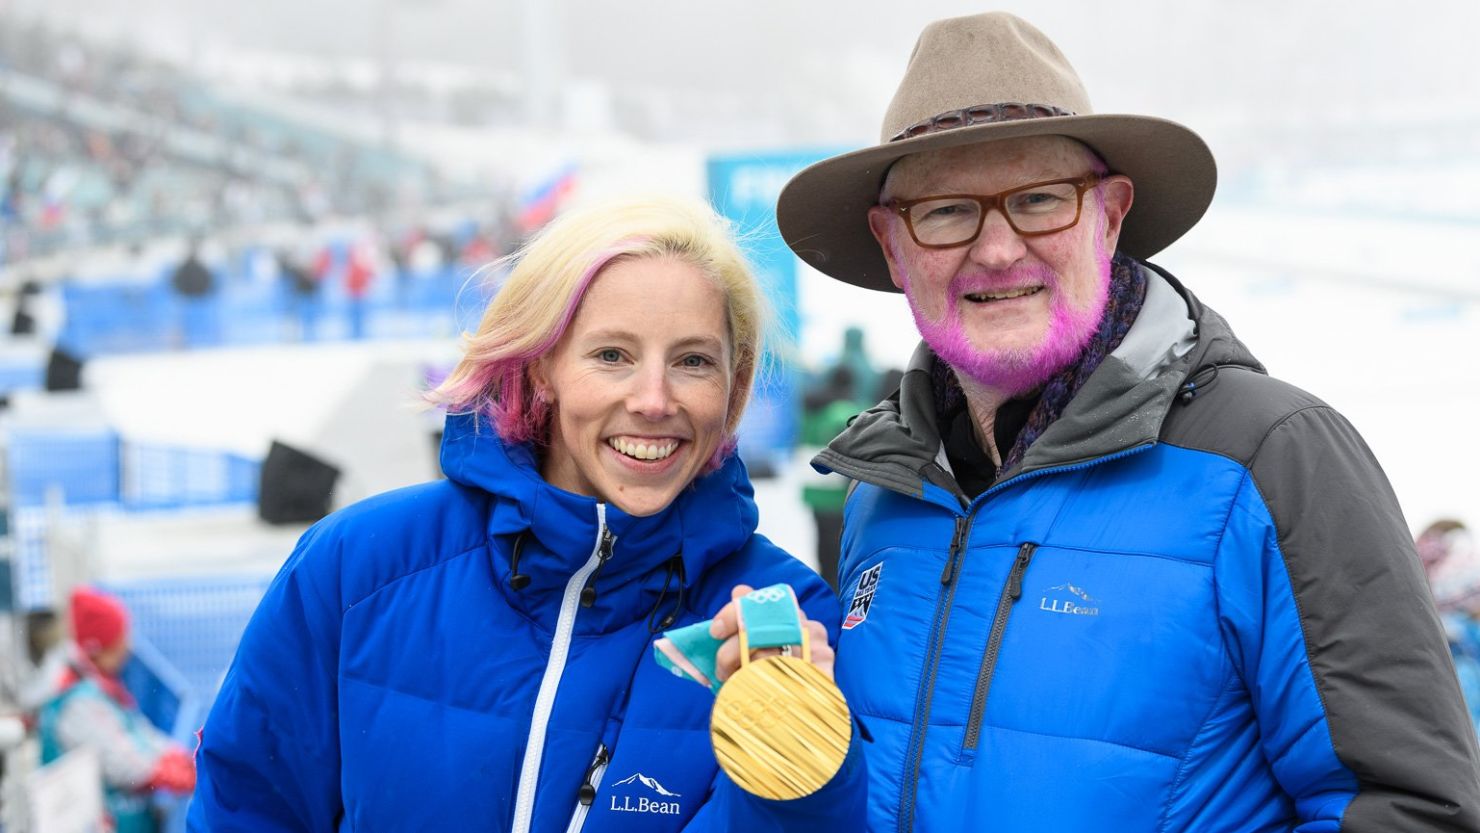 Tom Kelly has three times lost a bet and had his hair dyed pink to honor a US medalist.